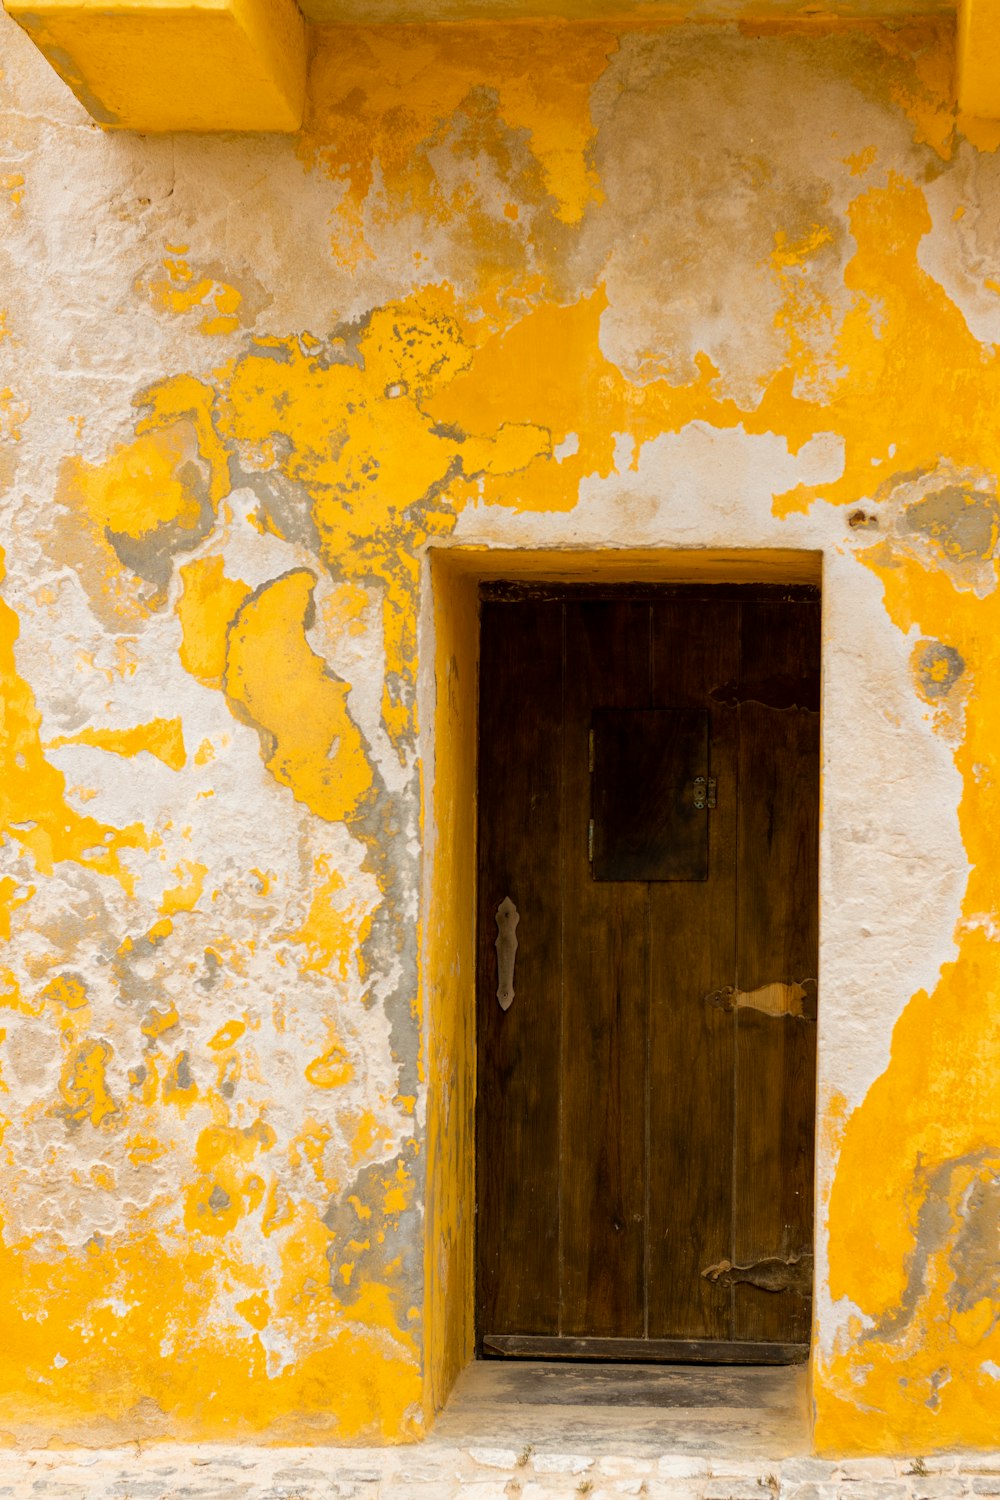 a yellow and white building with a wooden door